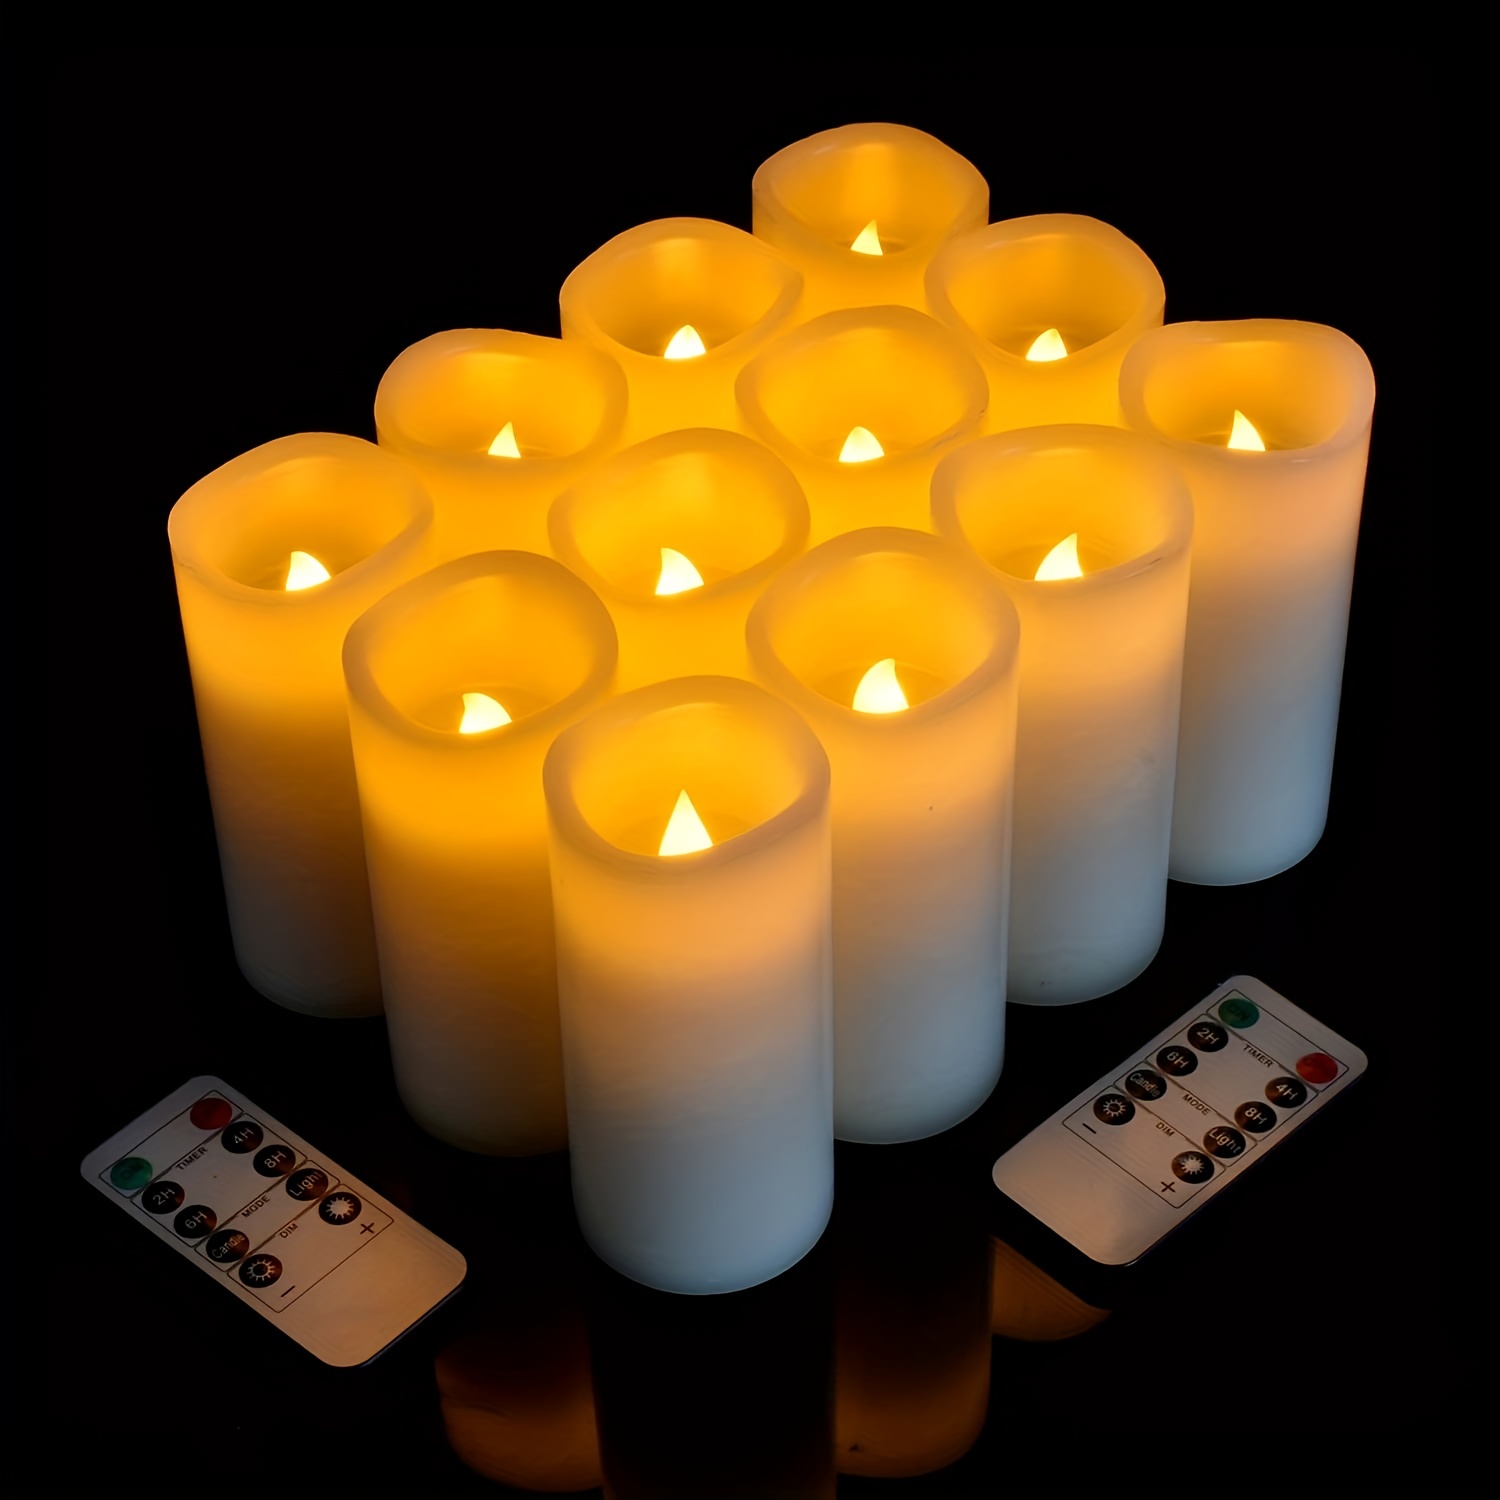 Large (17cm) LED Cream / Ivory Wick Pillar Wax Candle Battery Operated with  timer - THE BEACH PLUM COMPANY